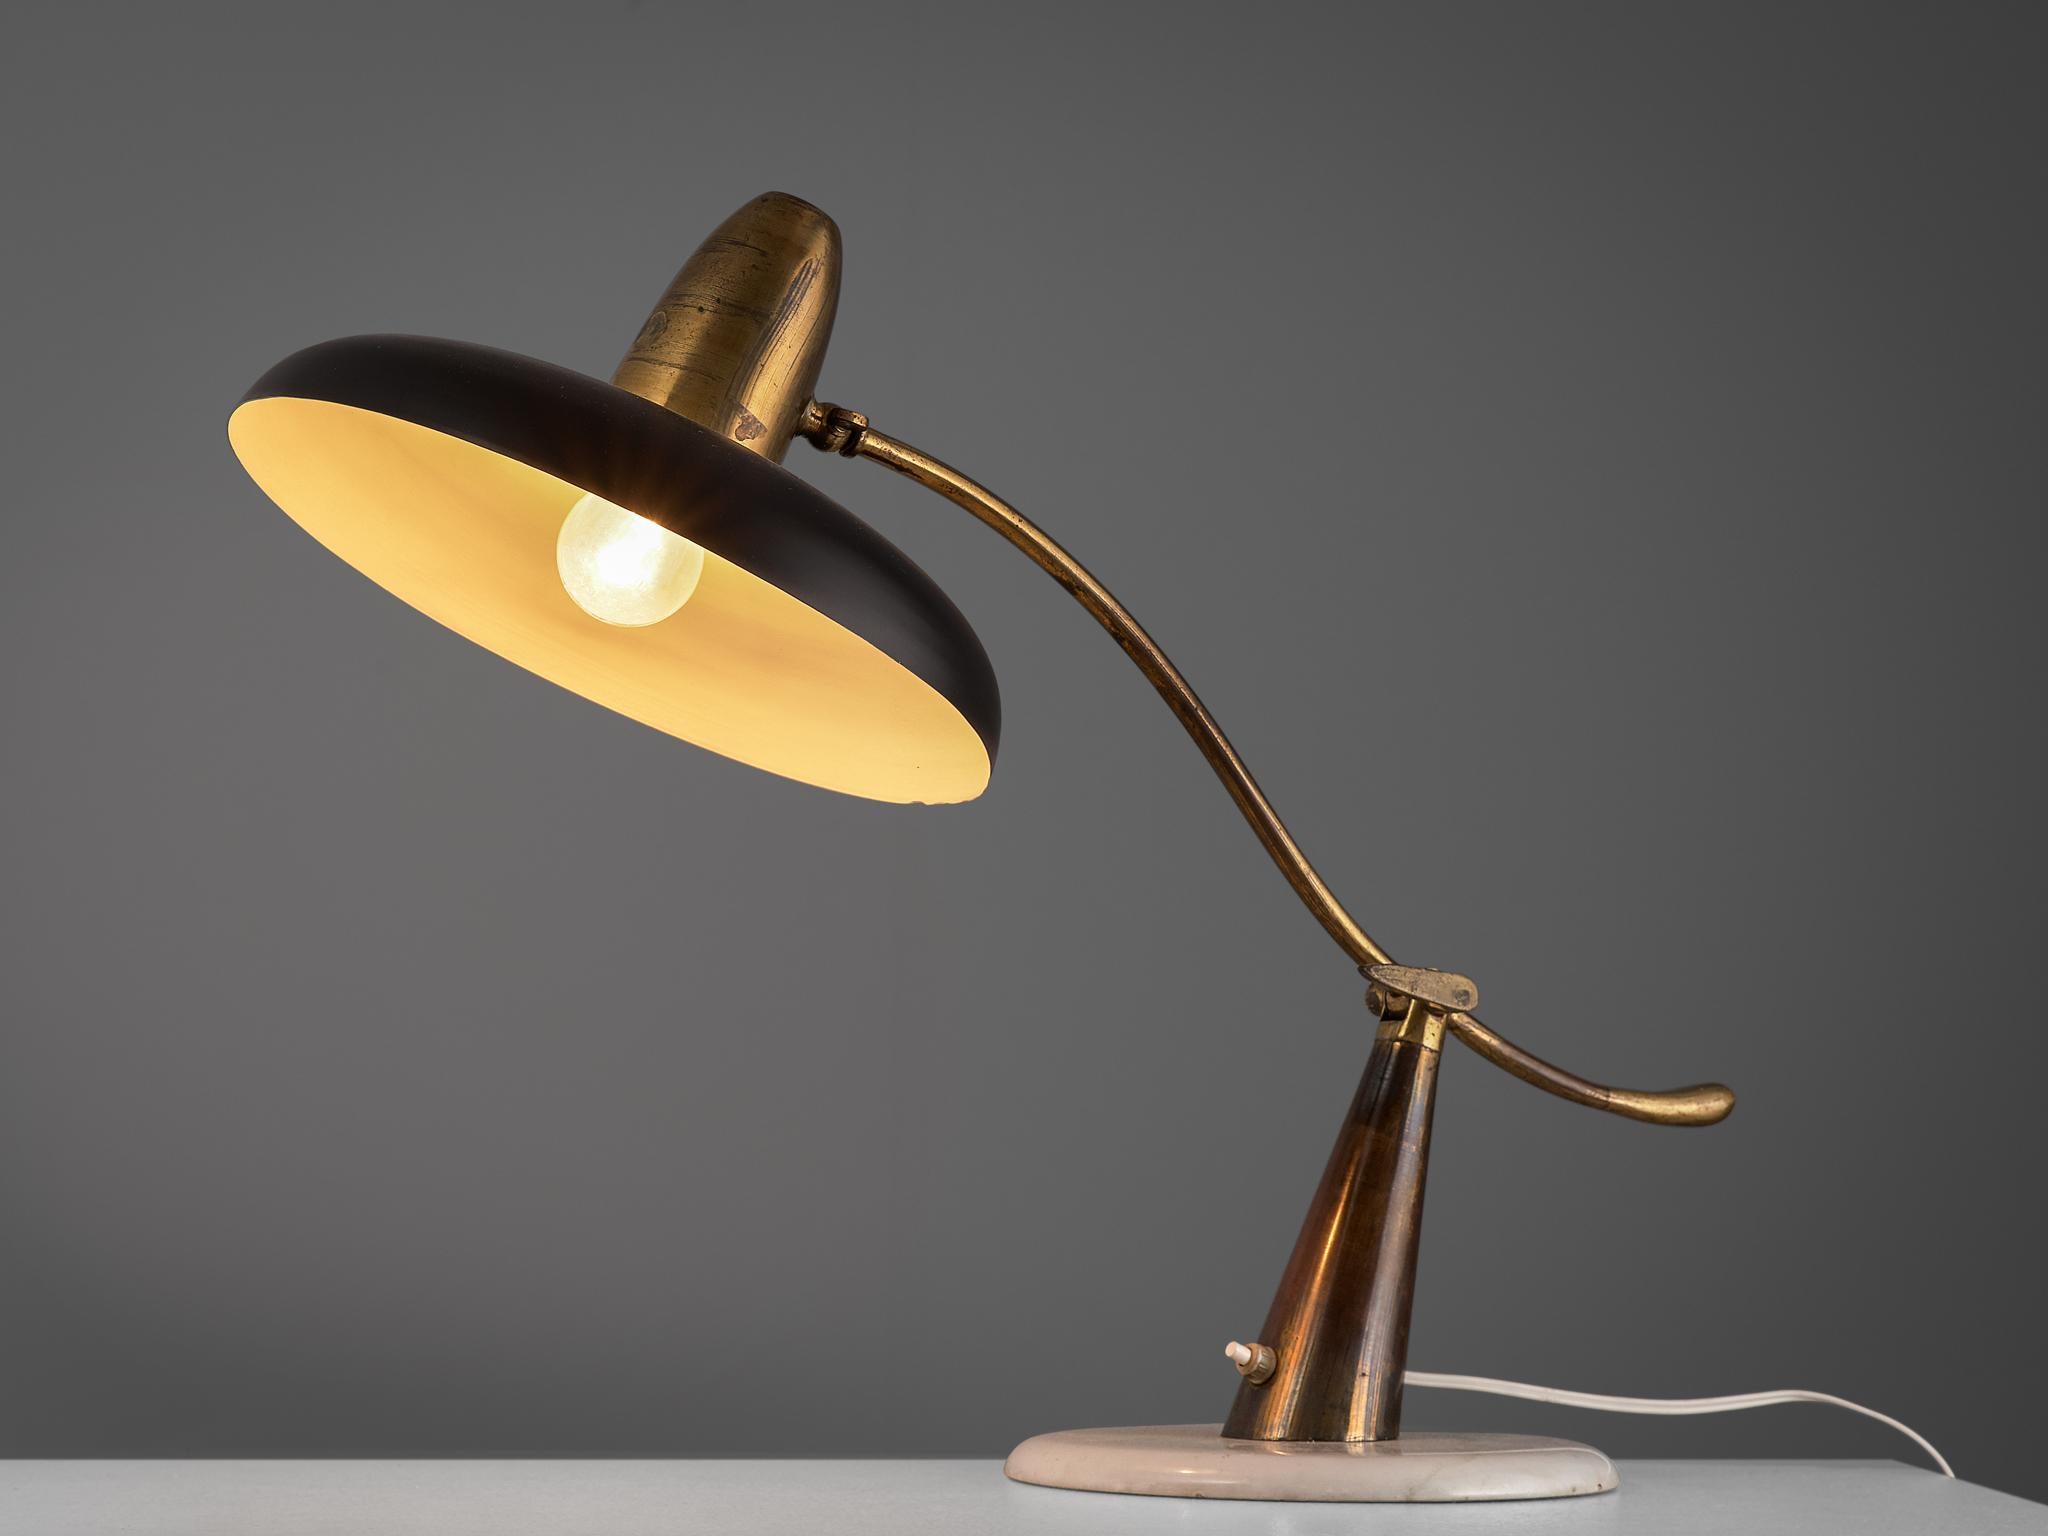 Lumen, table desk light, metal, brass and marble, Italy, circa 1950.

Stunning and elegant table lamp manufactured by Lumen in Milan. This wonderful curved brass desk light features a brass body and a off black coated shade. The stem of the light